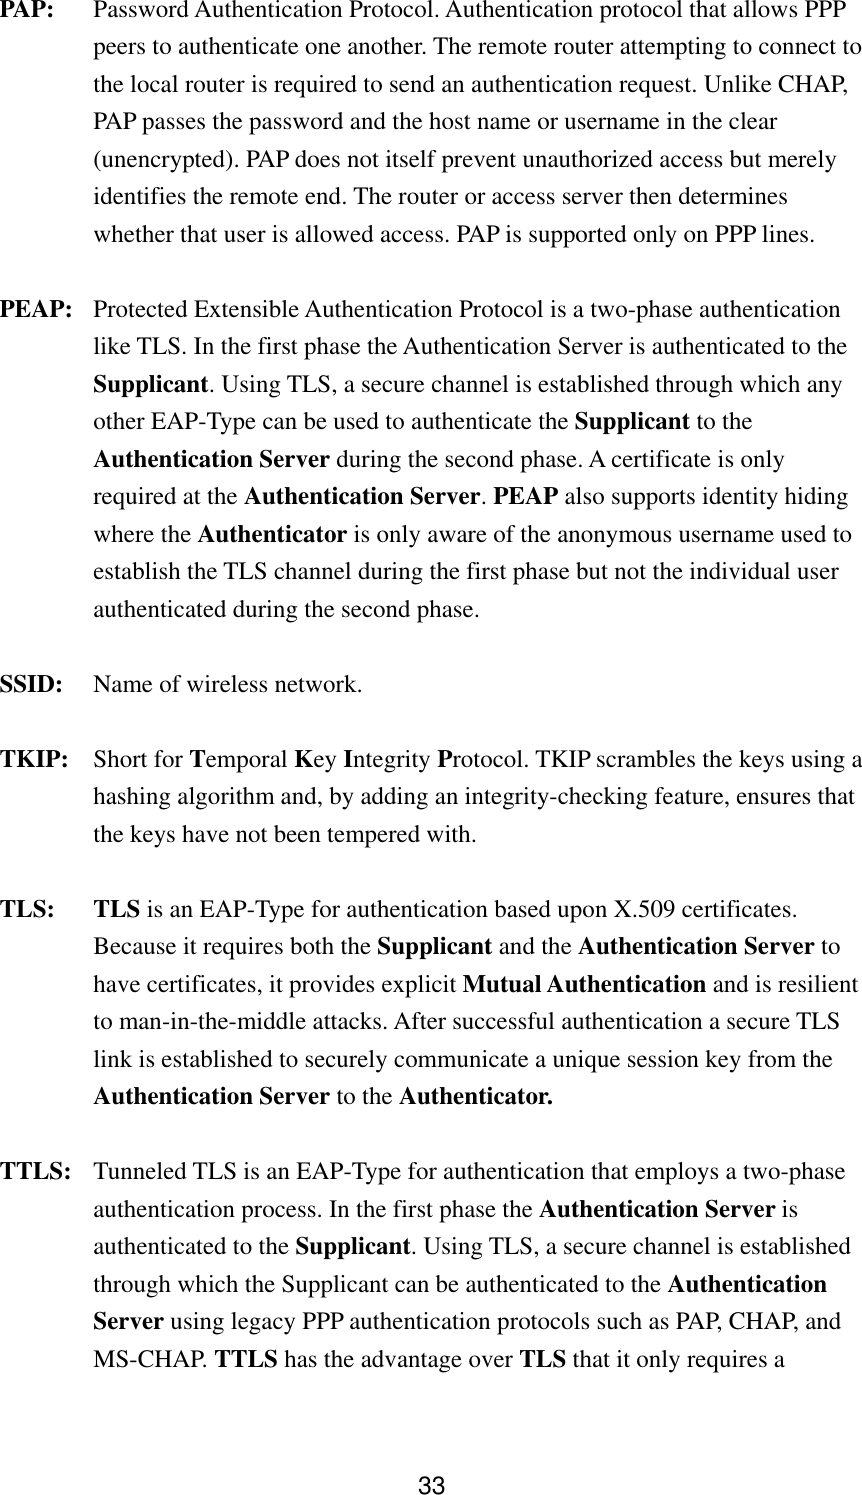  33PAP: Password Authentication Protocol. Authentication protocol that allows PPP peers to authenticate one another. The remote router attempting to connect to the local router is required to send an authentication request. Unlike CHAP, PAP passes the password and the host name or username in the clear (unencrypted). PAP does not itself prevent unauthorized access but merely identifies the remote end. The router or access server then determines whether that user is allowed access. PAP is supported only on PPP lines. PEAP: Protected Extensible Authentication Protocol is a two-phase authentication like TLS. In the first phase the Authentication Server is authenticated to the Supplicant. Using TLS, a secure channel is established through which any other EAP-Type can be used to authenticate the Supplicant to the Authentication Server during the second phase. A certificate is only required at the Authentication Server. PEAP also supports identity hiding where the Authenticator is only aware of the anonymous username used to establish the TLS channel during the first phase but not the individual user authenticated during the second phase. SSID:  Name of wireless network. TKIP: Short for Temporal Key Integrity Protocol. TKIP scrambles the keys using a hashing algorithm and, by adding an integrity-checking feature, ensures that the keys have not been tempered with.     TLS: TLS is an EAP-Type for authentication based upon X.509 certificates. Because it requires both the Supplicant and the Authentication Server to have certificates, it provides explicit Mutual Authentication and is resilient to man-in-the-middle attacks. After successful authentication a secure TLS link is established to securely communicate a unique session key from the Authentication Server to the Authenticator. TTLS:  Tunneled TLS is an EAP-Type for authentication that employs a two-phase authentication process. In the first phase the Authentication Server is authenticated to the Supplicant. Using TLS, a secure channel is established through which the Supplicant can be authenticated to the Authentication Server using legacy PPP authentication protocols such as PAP, CHAP, and MS-CHAP. TTLS has the advantage over TLS that it only requires a 